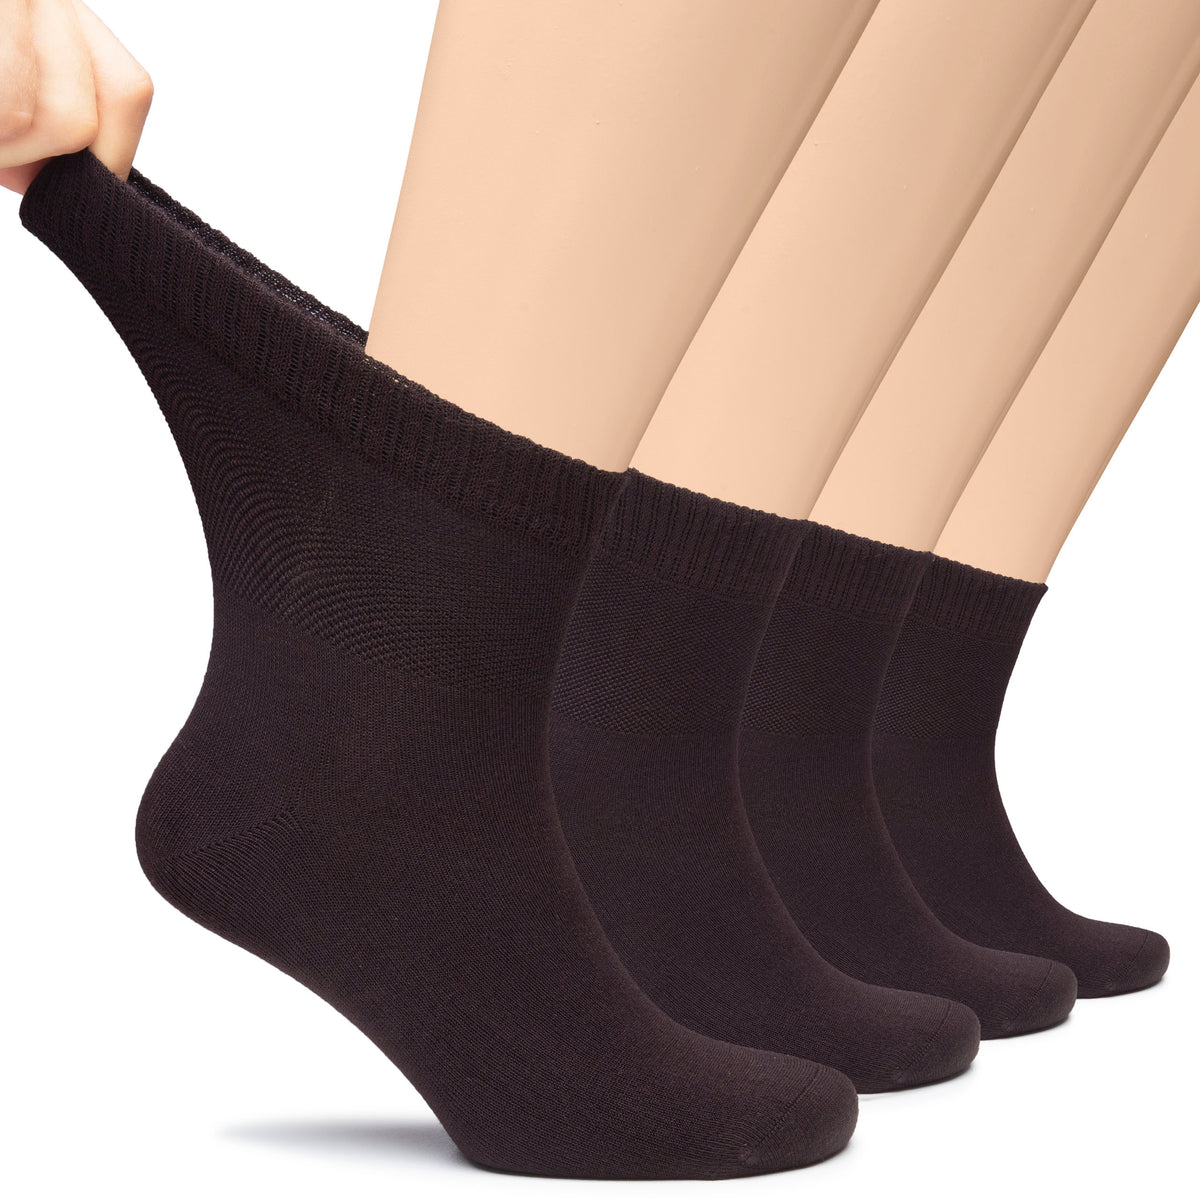 The image depicts a man's hand holding a man's feet adorned in black socks, highlighting Men's Bamboo Diabetic Socks